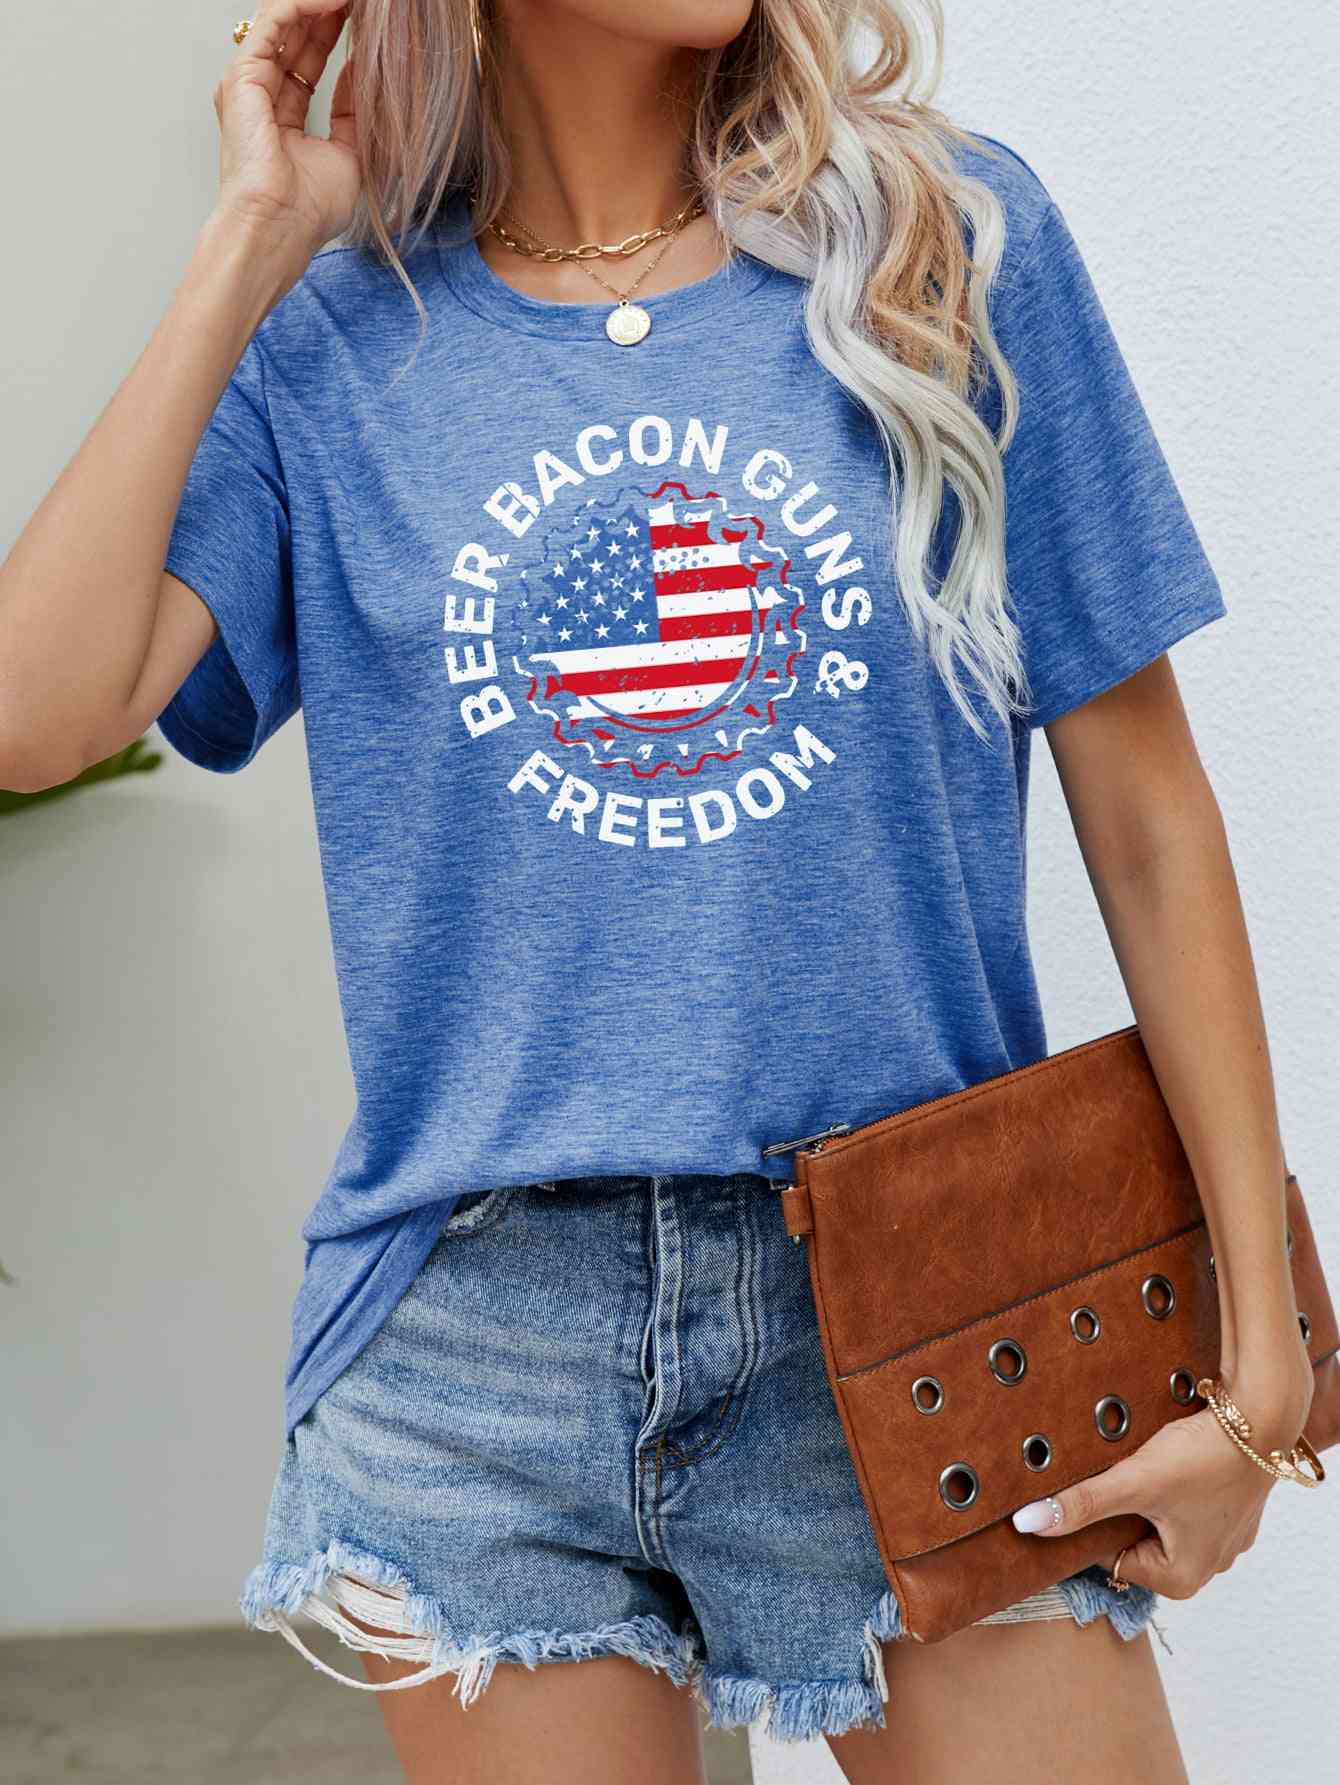 BEER BACON GUNS & FREEDOM US Flag Graphic Tee Cobalt Blue S 